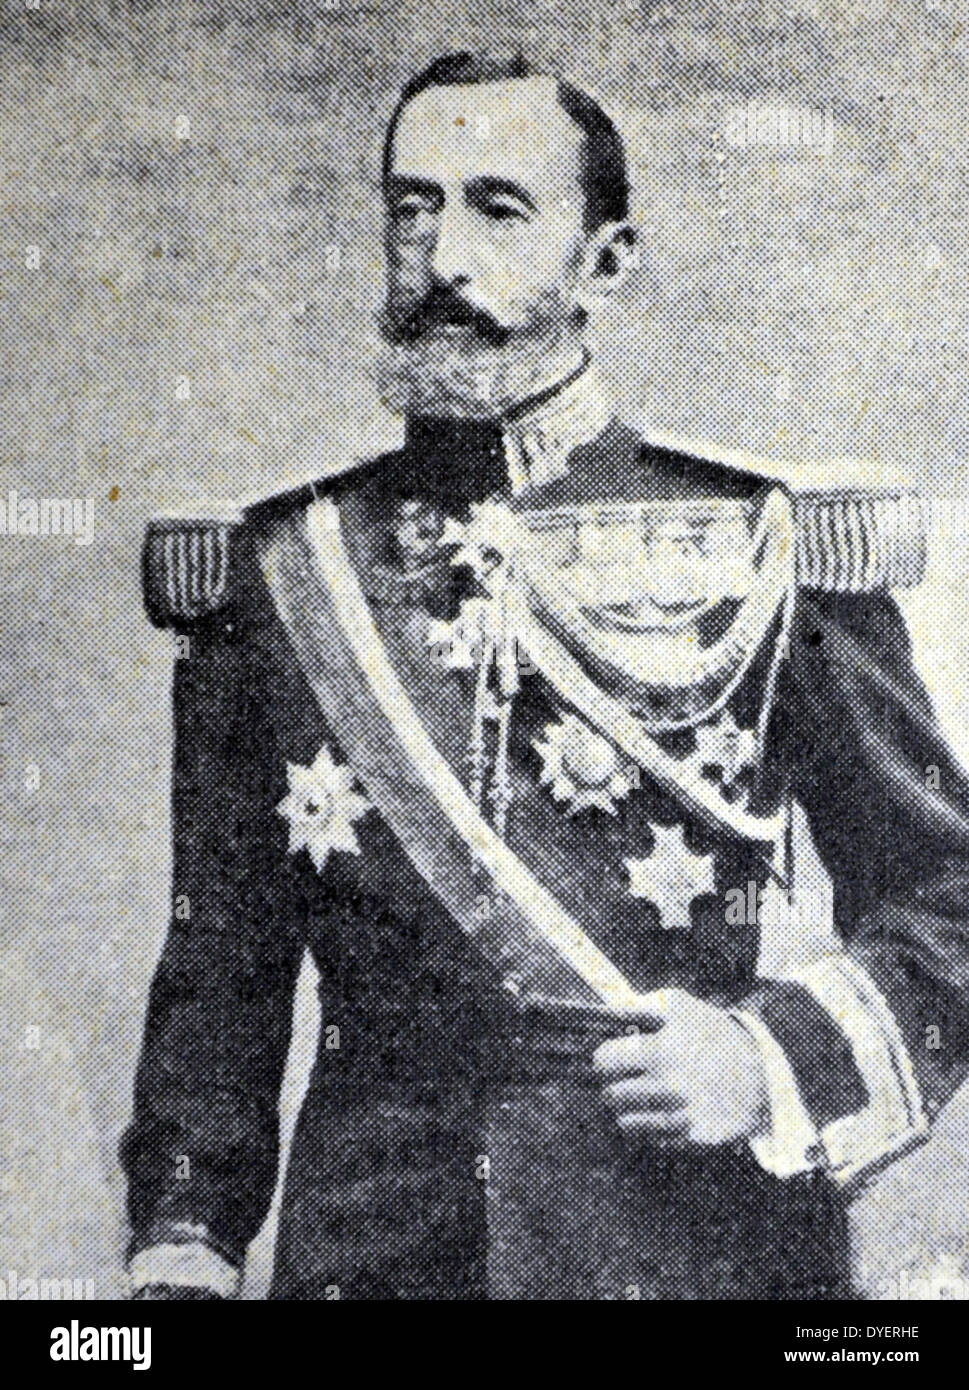 Joaquin Milans del Bosch y Carrió (in Catalan, Joaquim Milans del Bosch i Carrió) (Barcelona, 1854 - Madrid, 1936)[1] was a Spanish military officer of Catalan origin. The change in the ideological orientation of the Milans del Bosch family was completed with his generation; traditionally, they had been liberal military officers, but during the twentieth century they aligned themselves with reactionary forces. Stock Photo